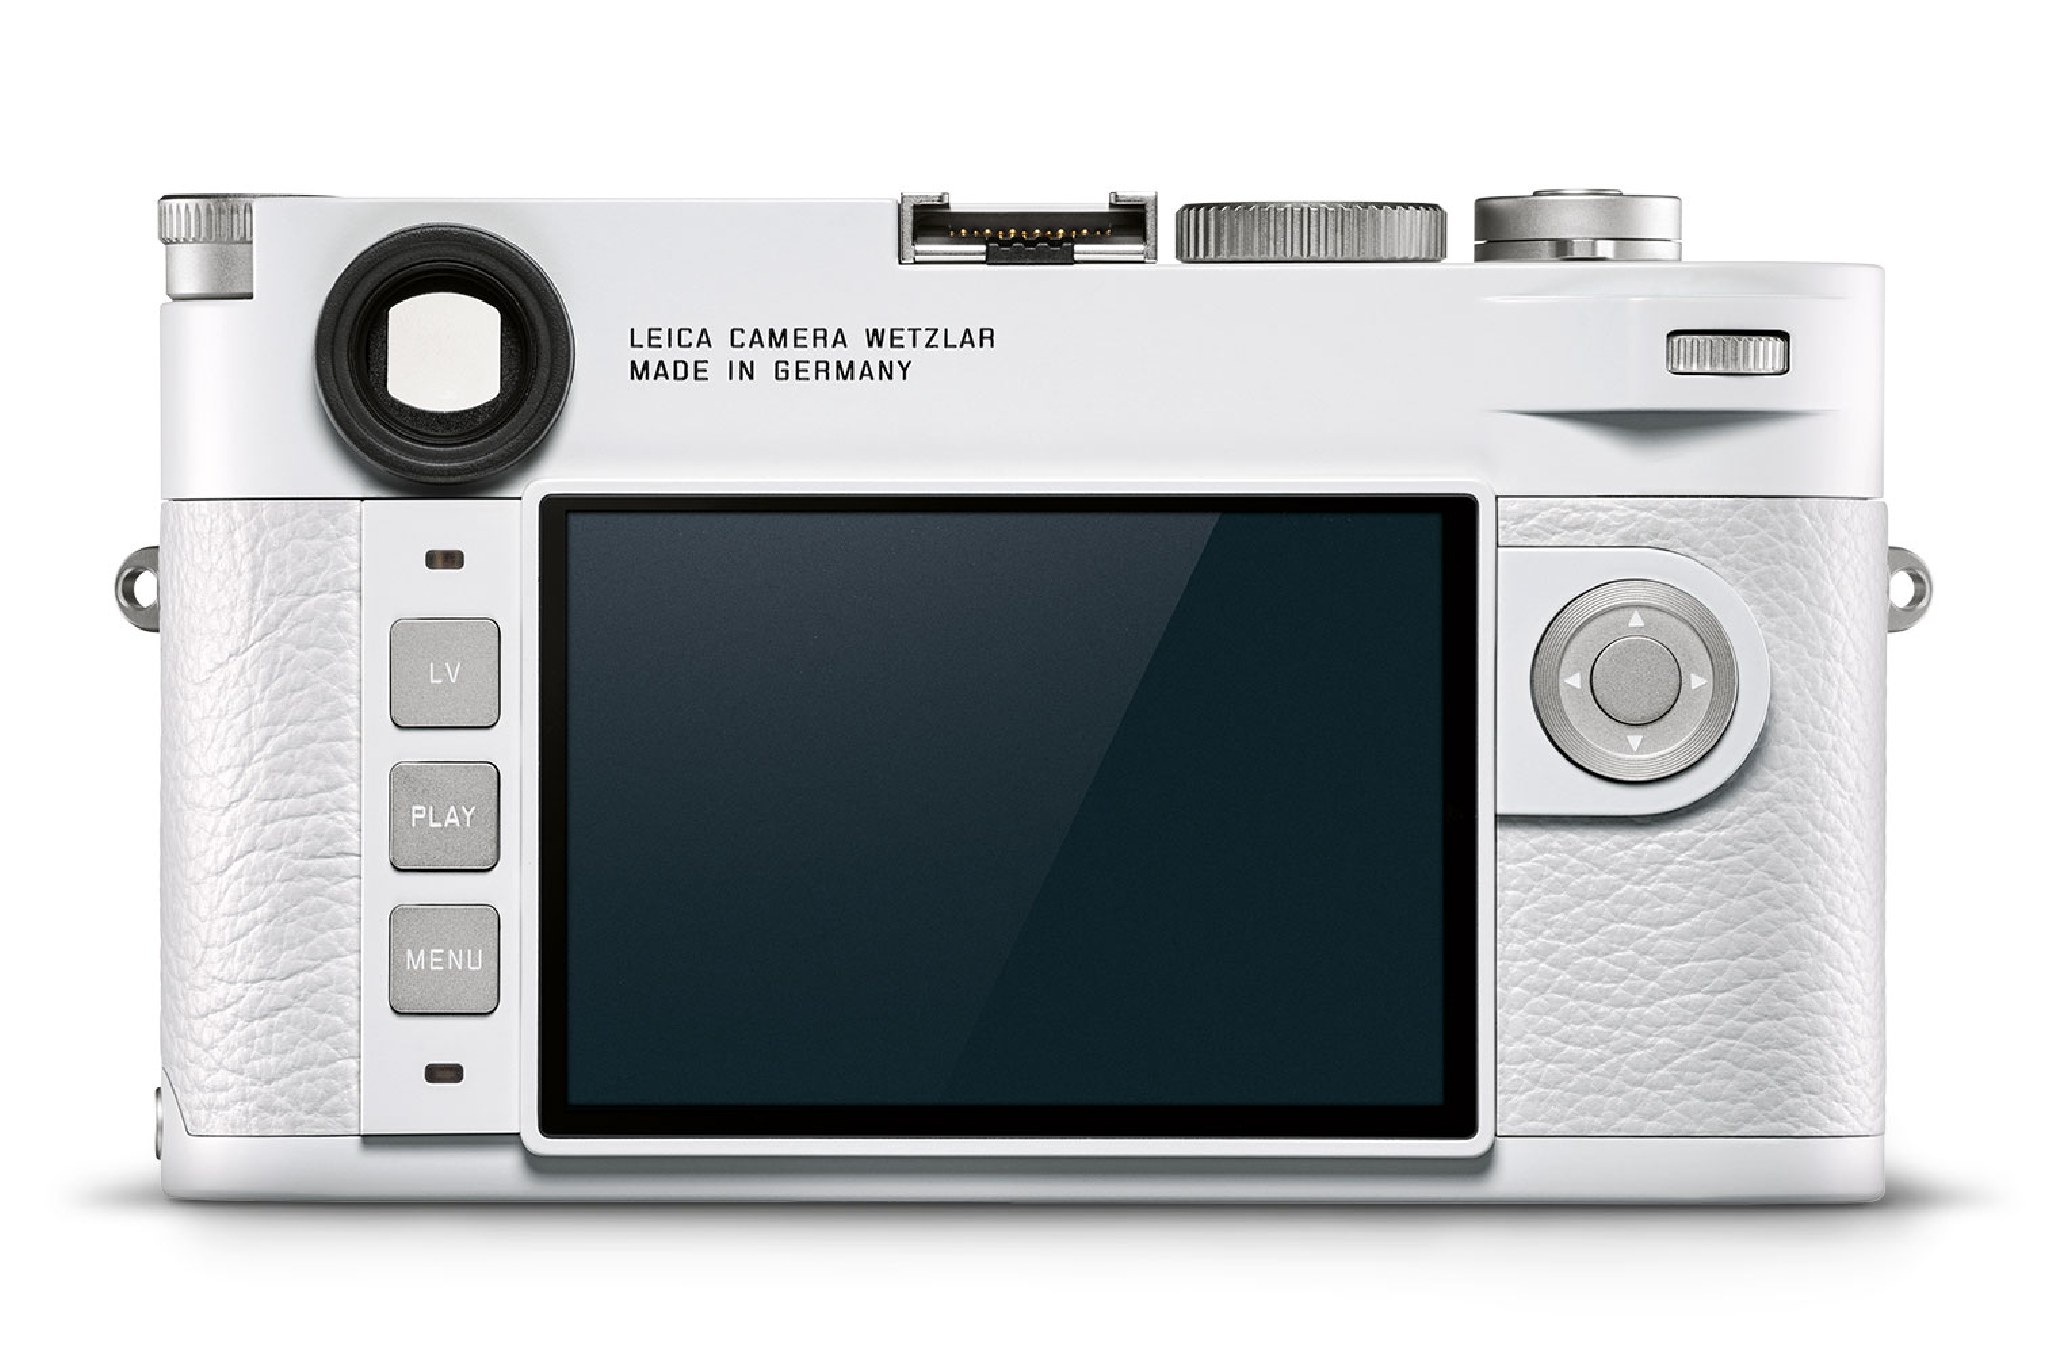 all-white-Leica-M10-limited-edition-camera-1.jpg